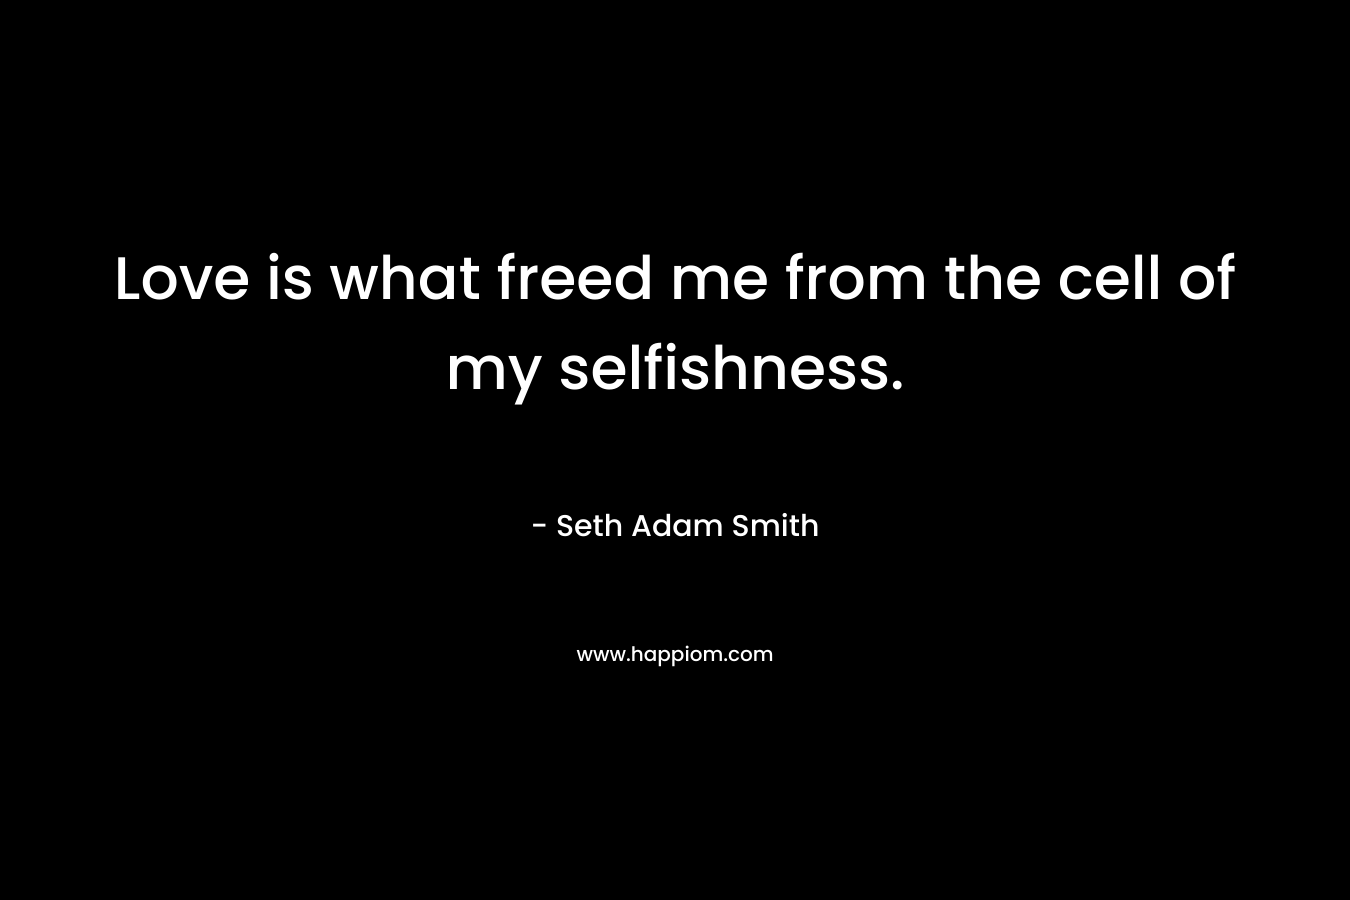 Love is what freed me from the cell of my selfishness.